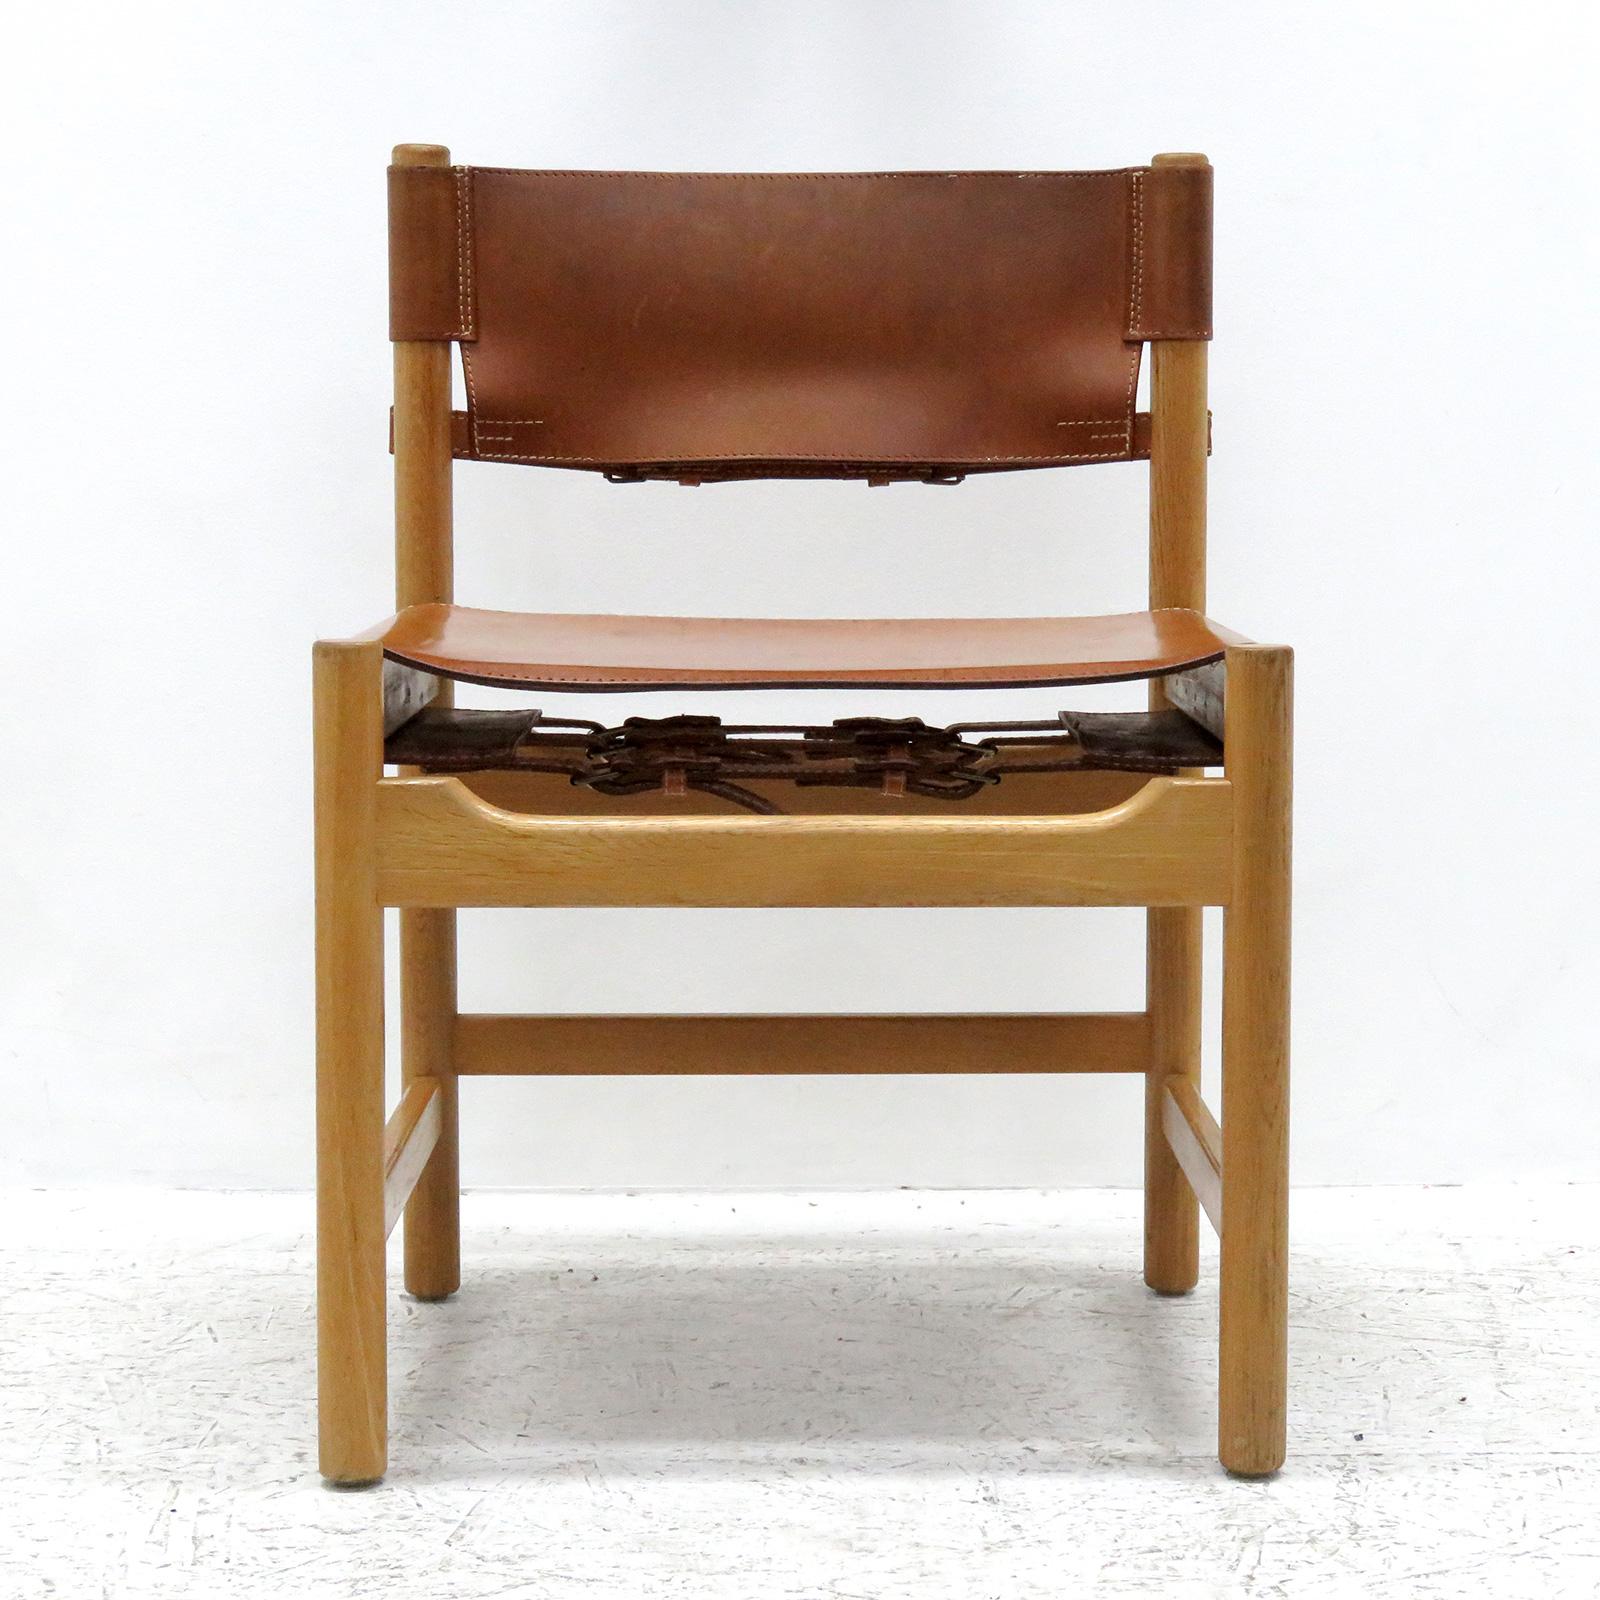 Wonderful set of eight Børge Mogensen dining chairs, model no. 577 for Karl Andersson & Söner, with saddle leather on oak frames, great patina.